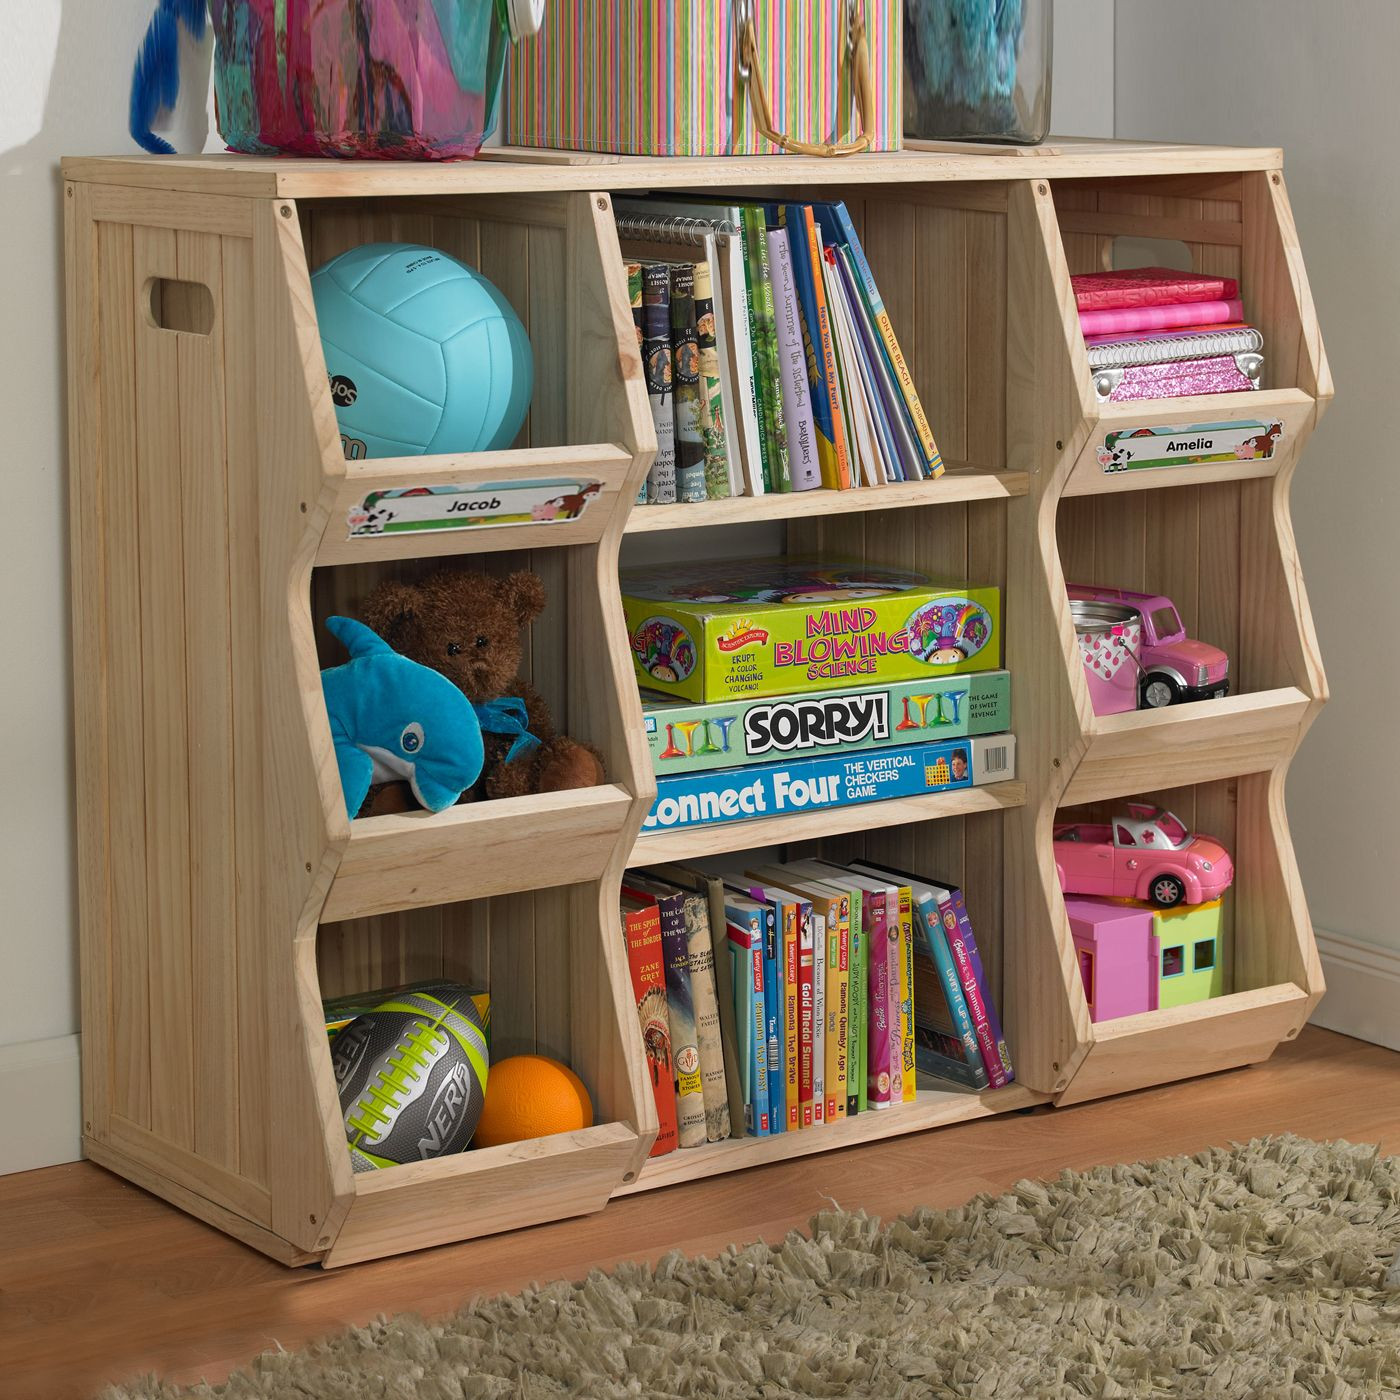 Childrens Bookcases And Storage
 Merry Products SLF Children s Bookshelf Cubby